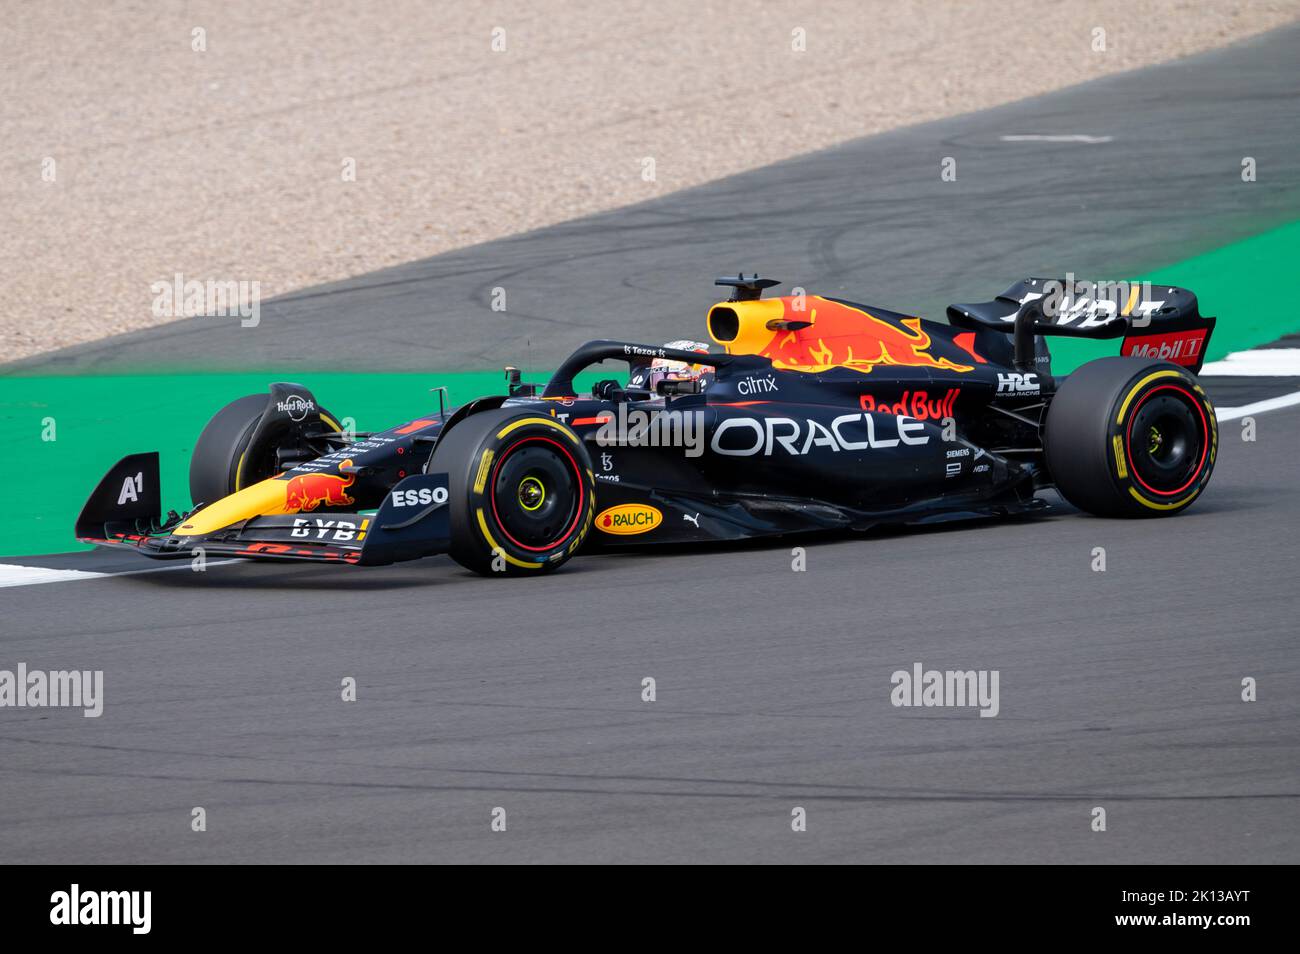 RedBull F1 car driven by World Champion Max Verstappen at Silverstone Circuit, Towcester, Northamptonshire, England, United Kingdom, Europe Stock Photo